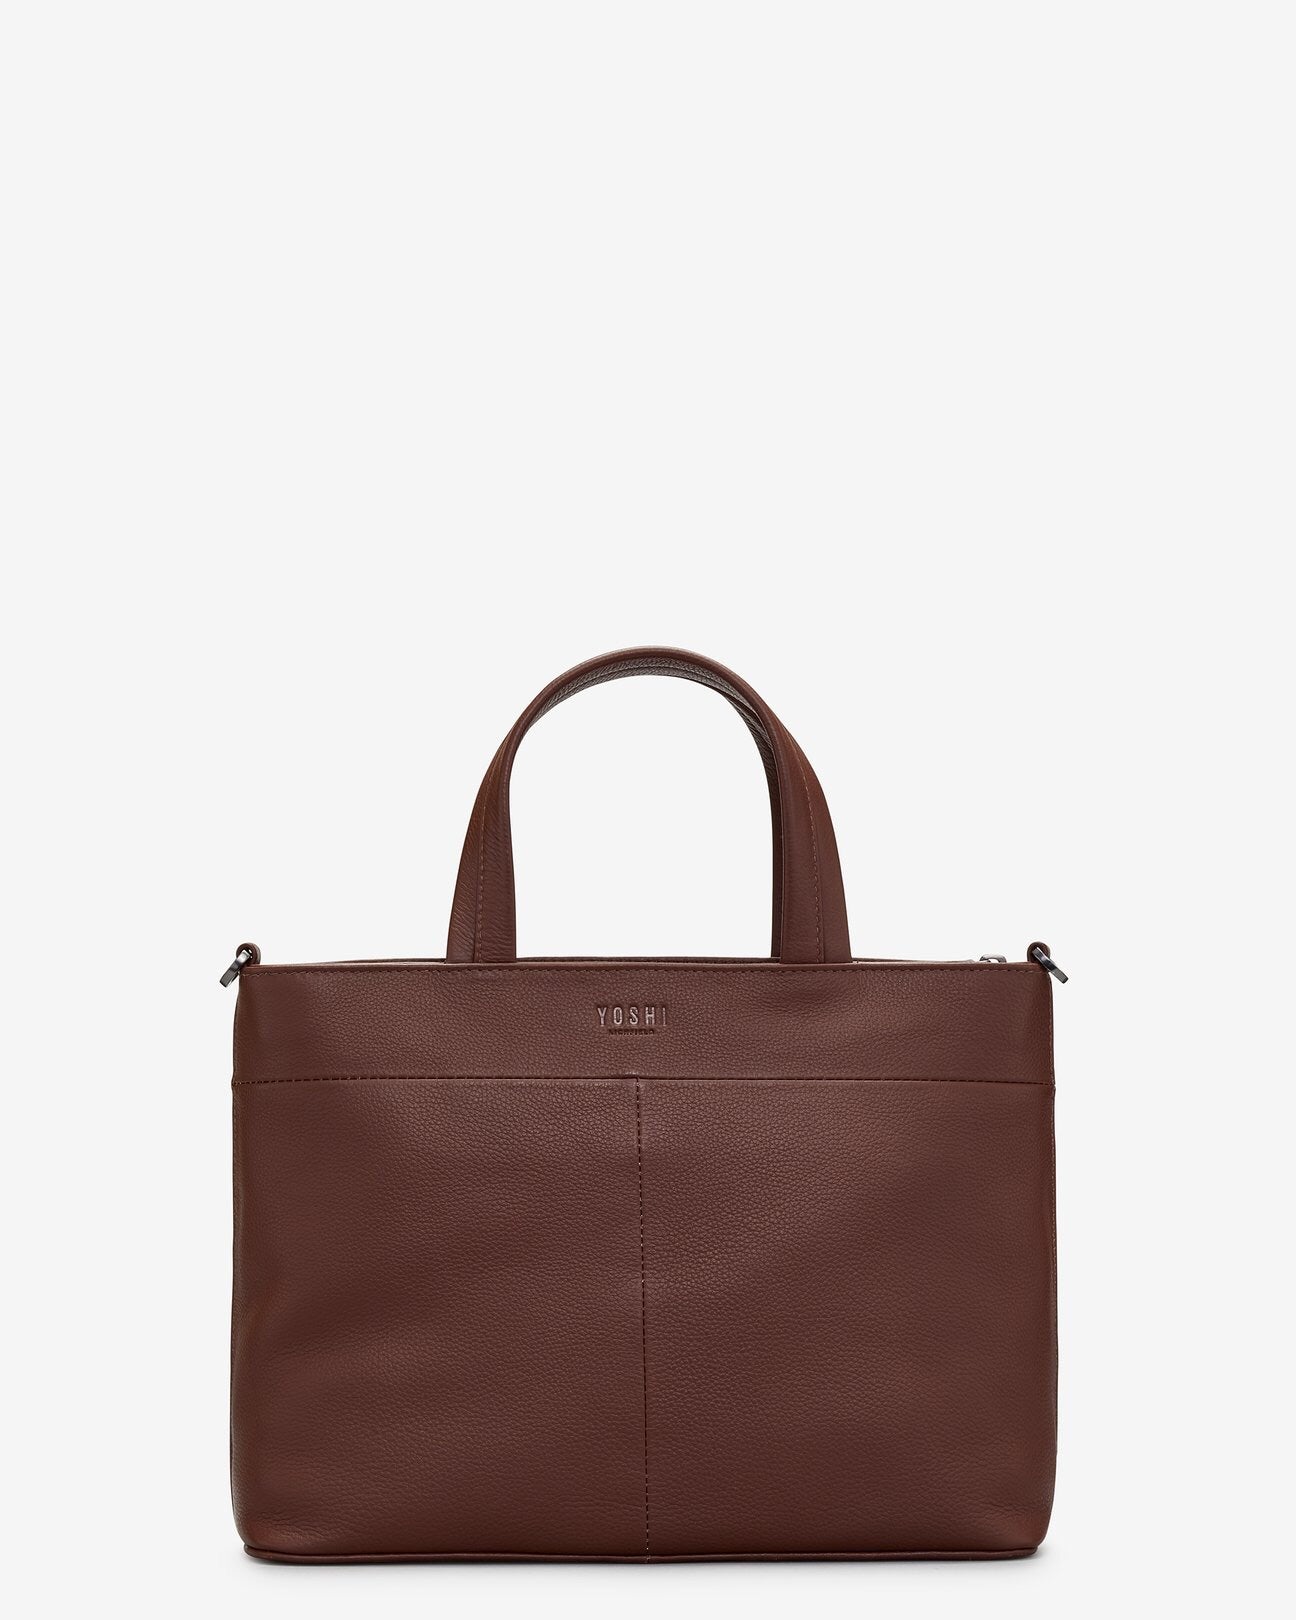 Yoshi Bookworm Brown Leather Multiway Grab Bag - Sands Boutique clothing and gifts